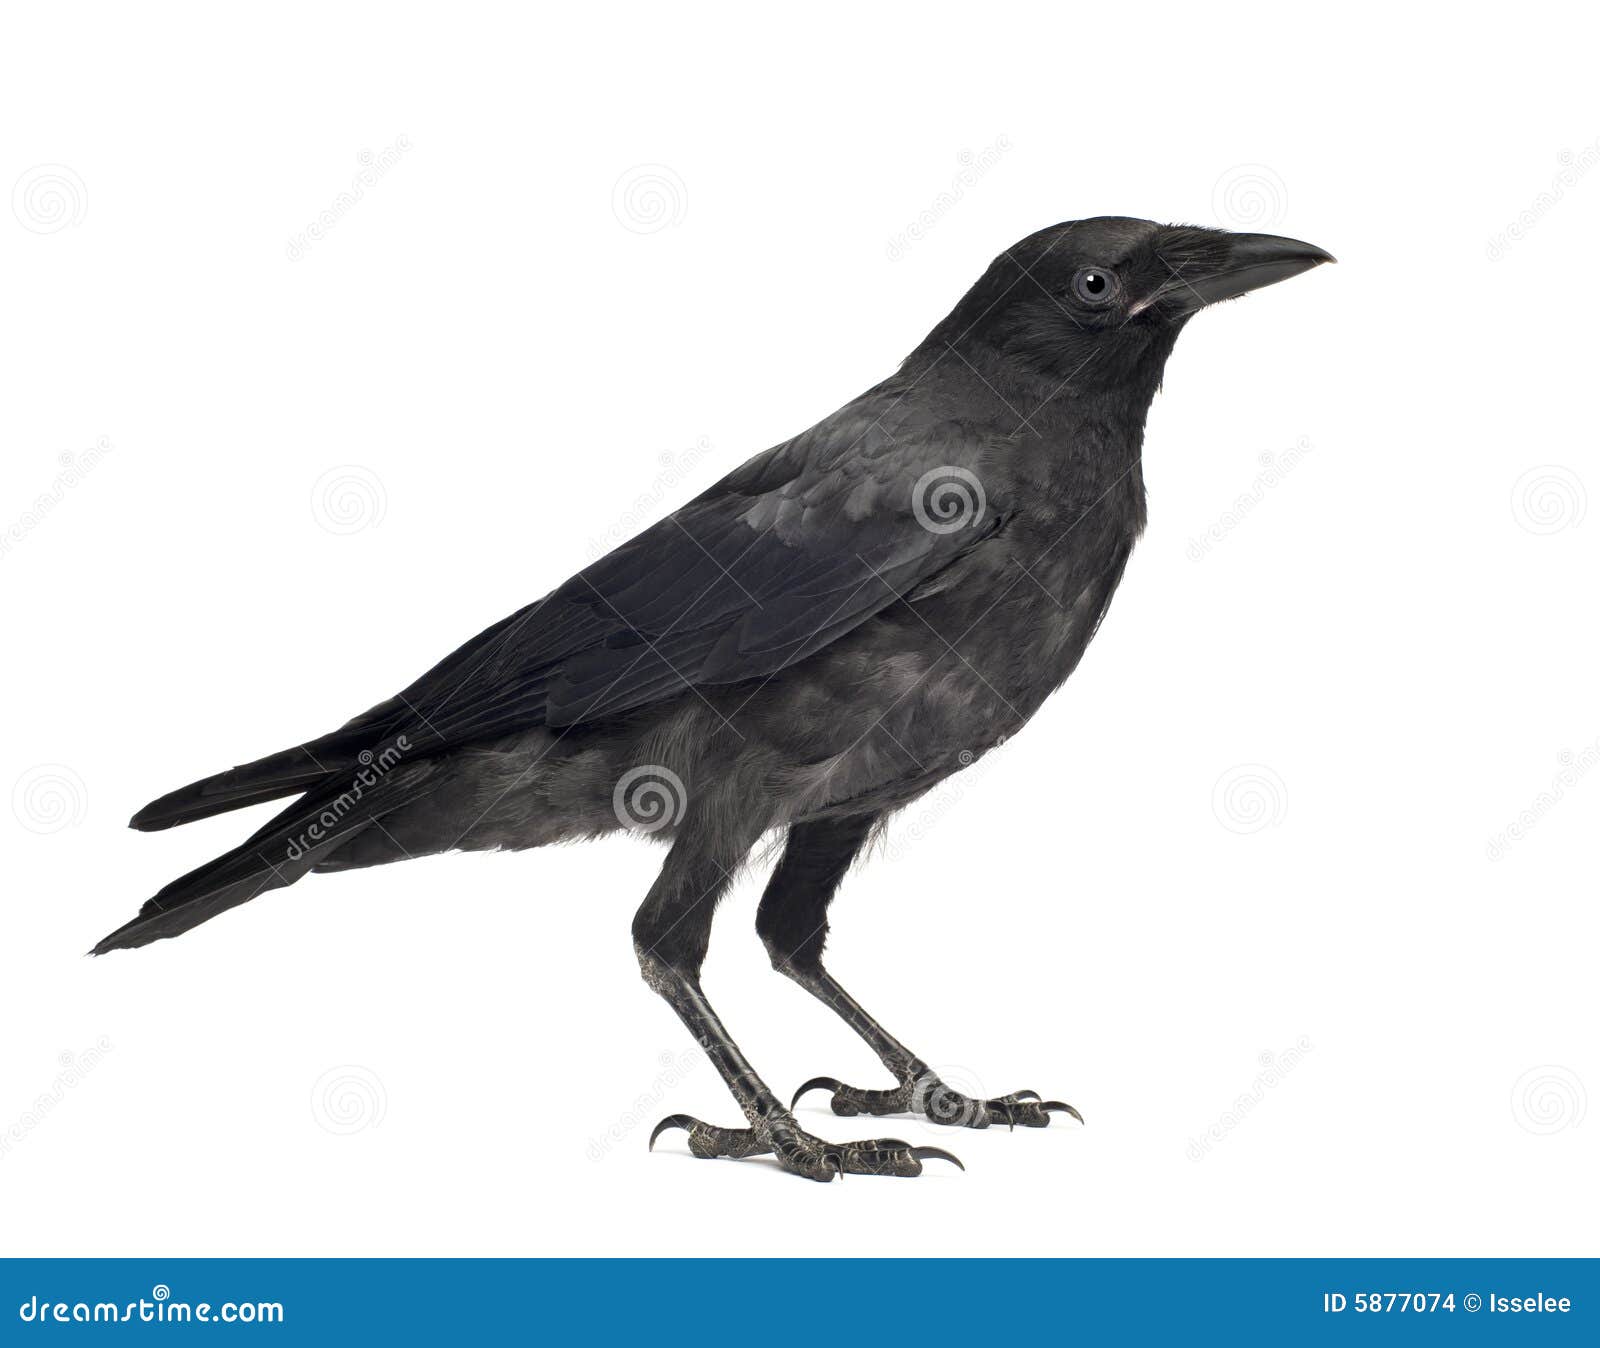 young carrion crow - corvus corone (3 months)